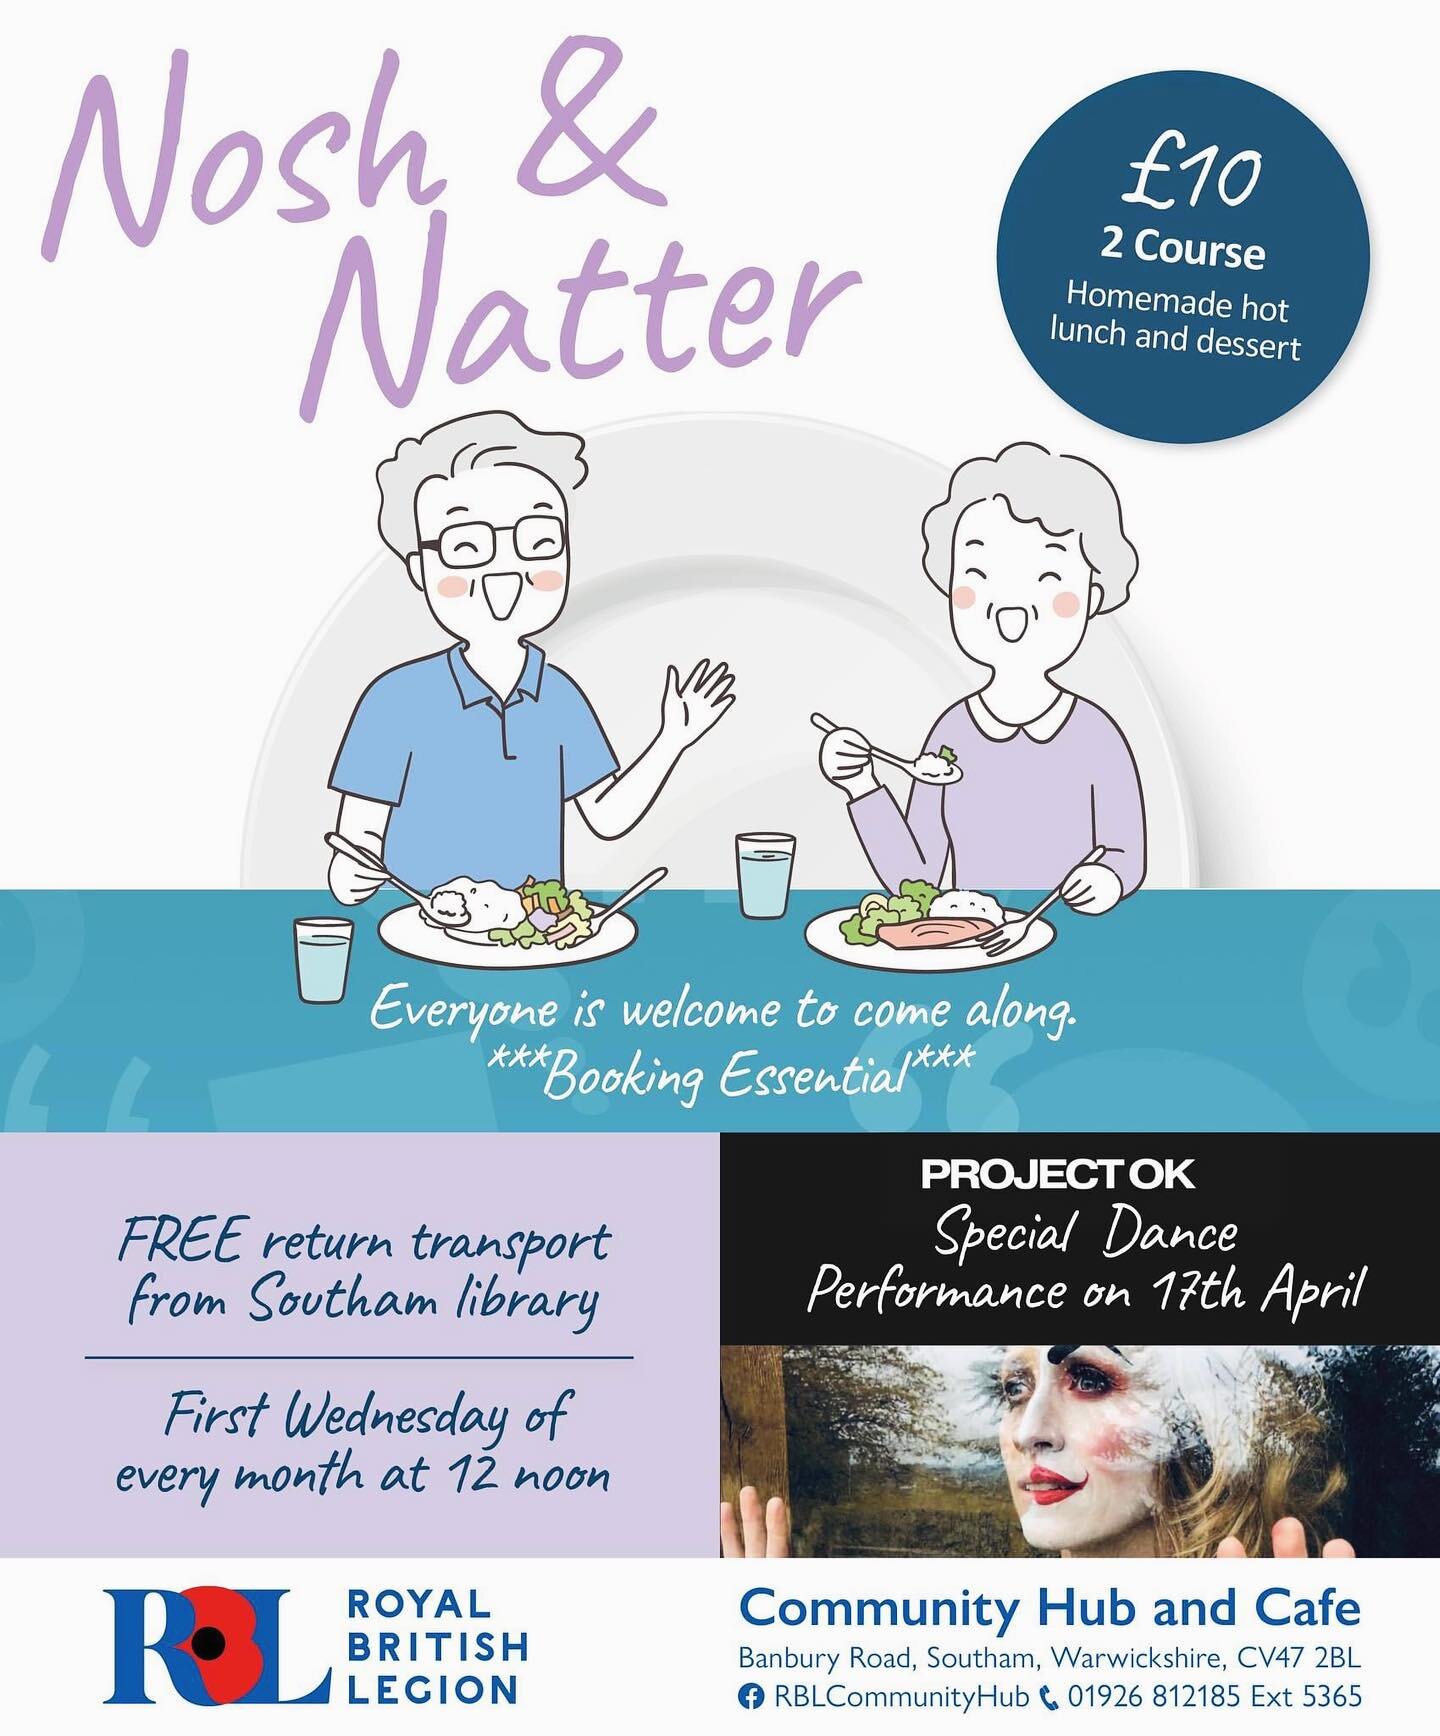 @rblcommunityhub are excited to announce a 2nd Nosh and Natter on *Wednesday 17th April, where we welcome local dance group Project OK , who will be performing for us. The dance duet is part of an Arts Council Funded project, focusing on the Southam 